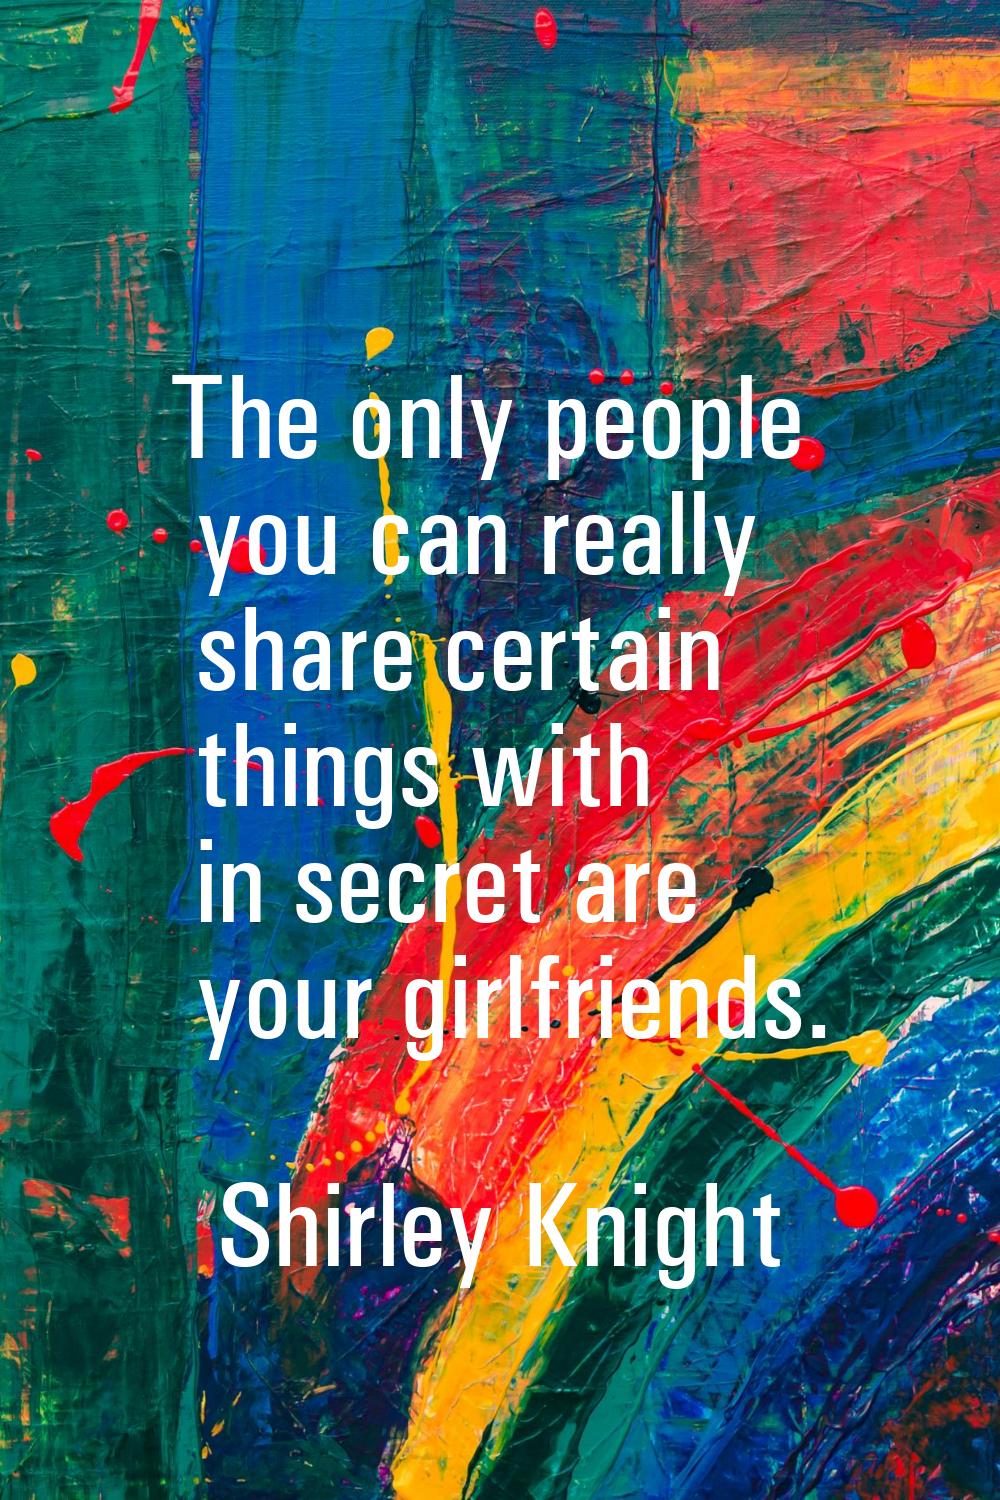 The only people you can really share certain things with in secret are your girlfriends.